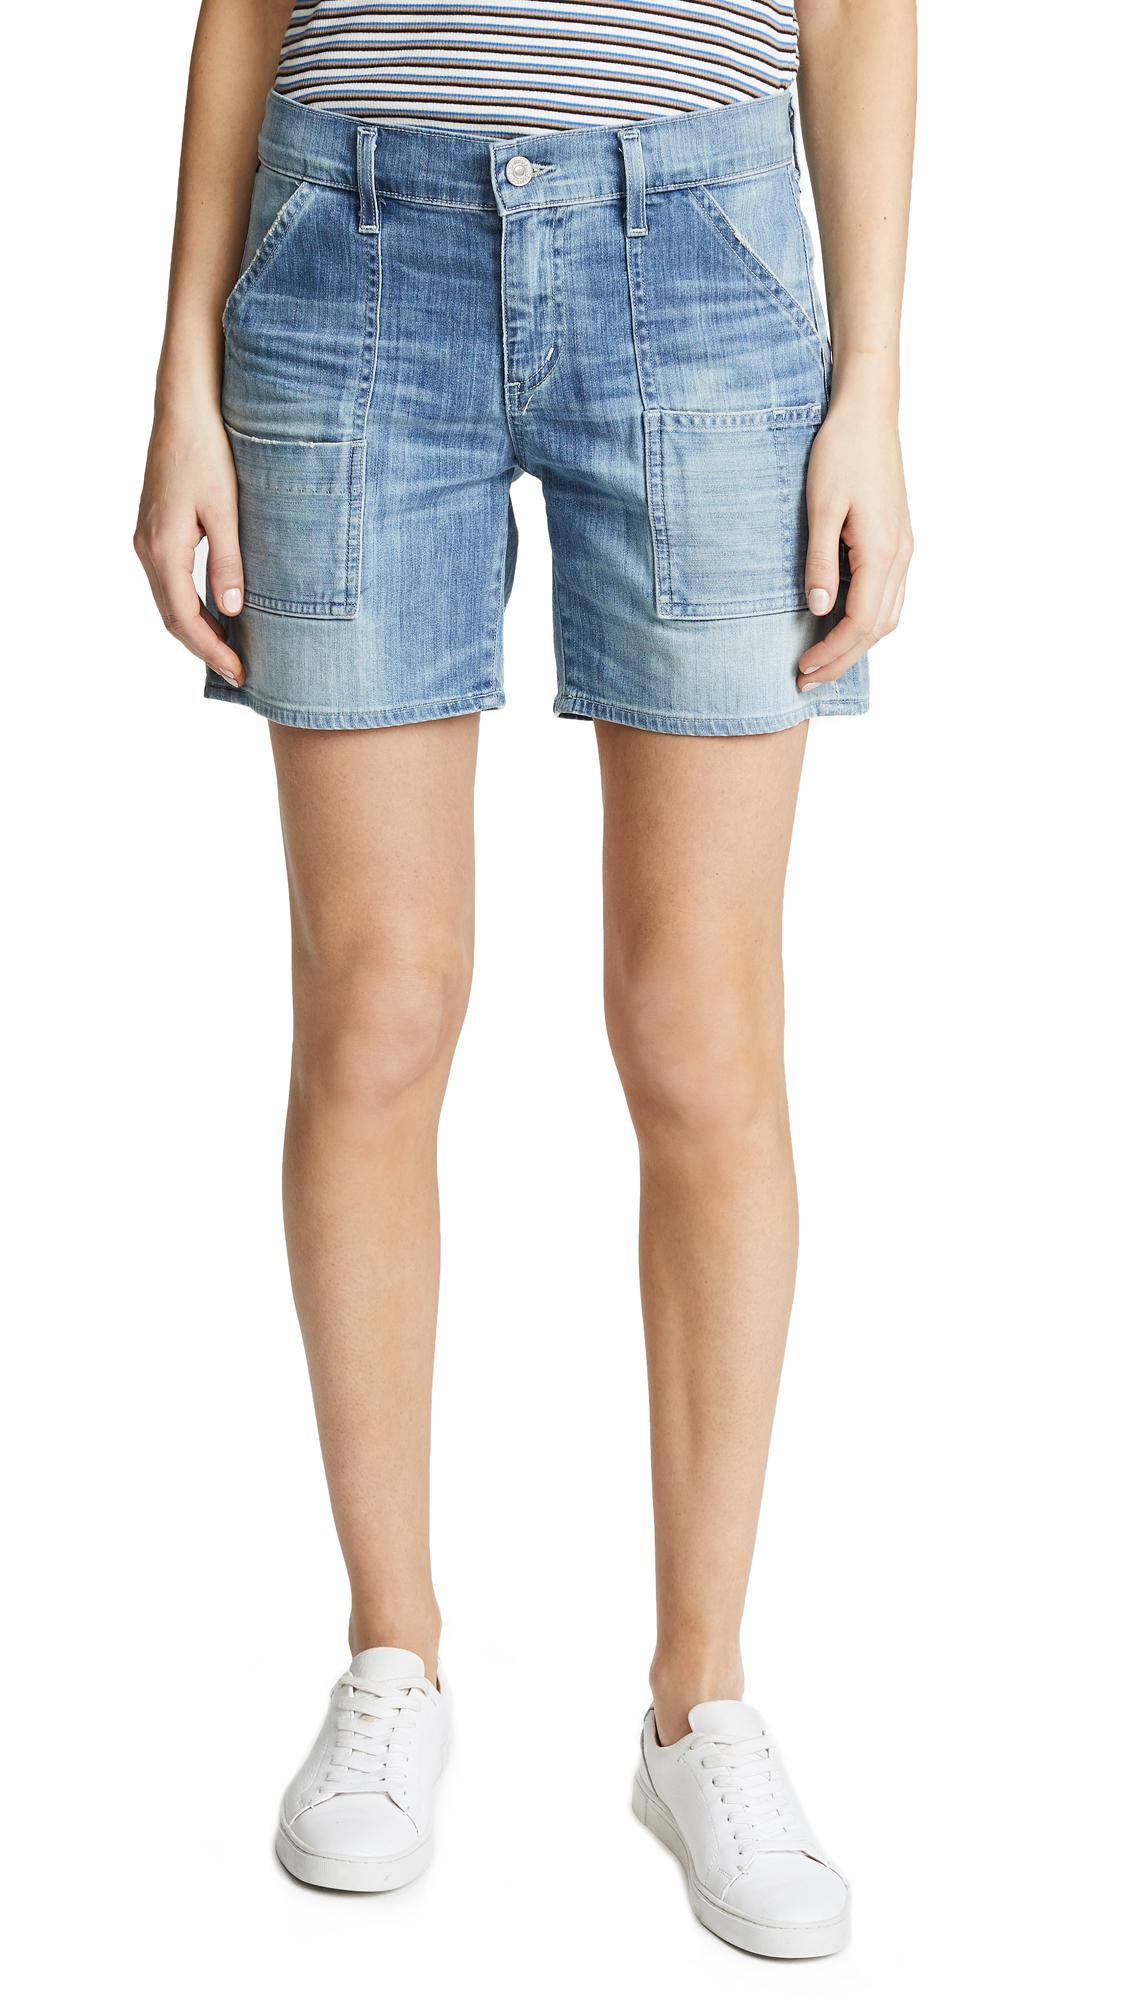 citizens of humanity leah shorts